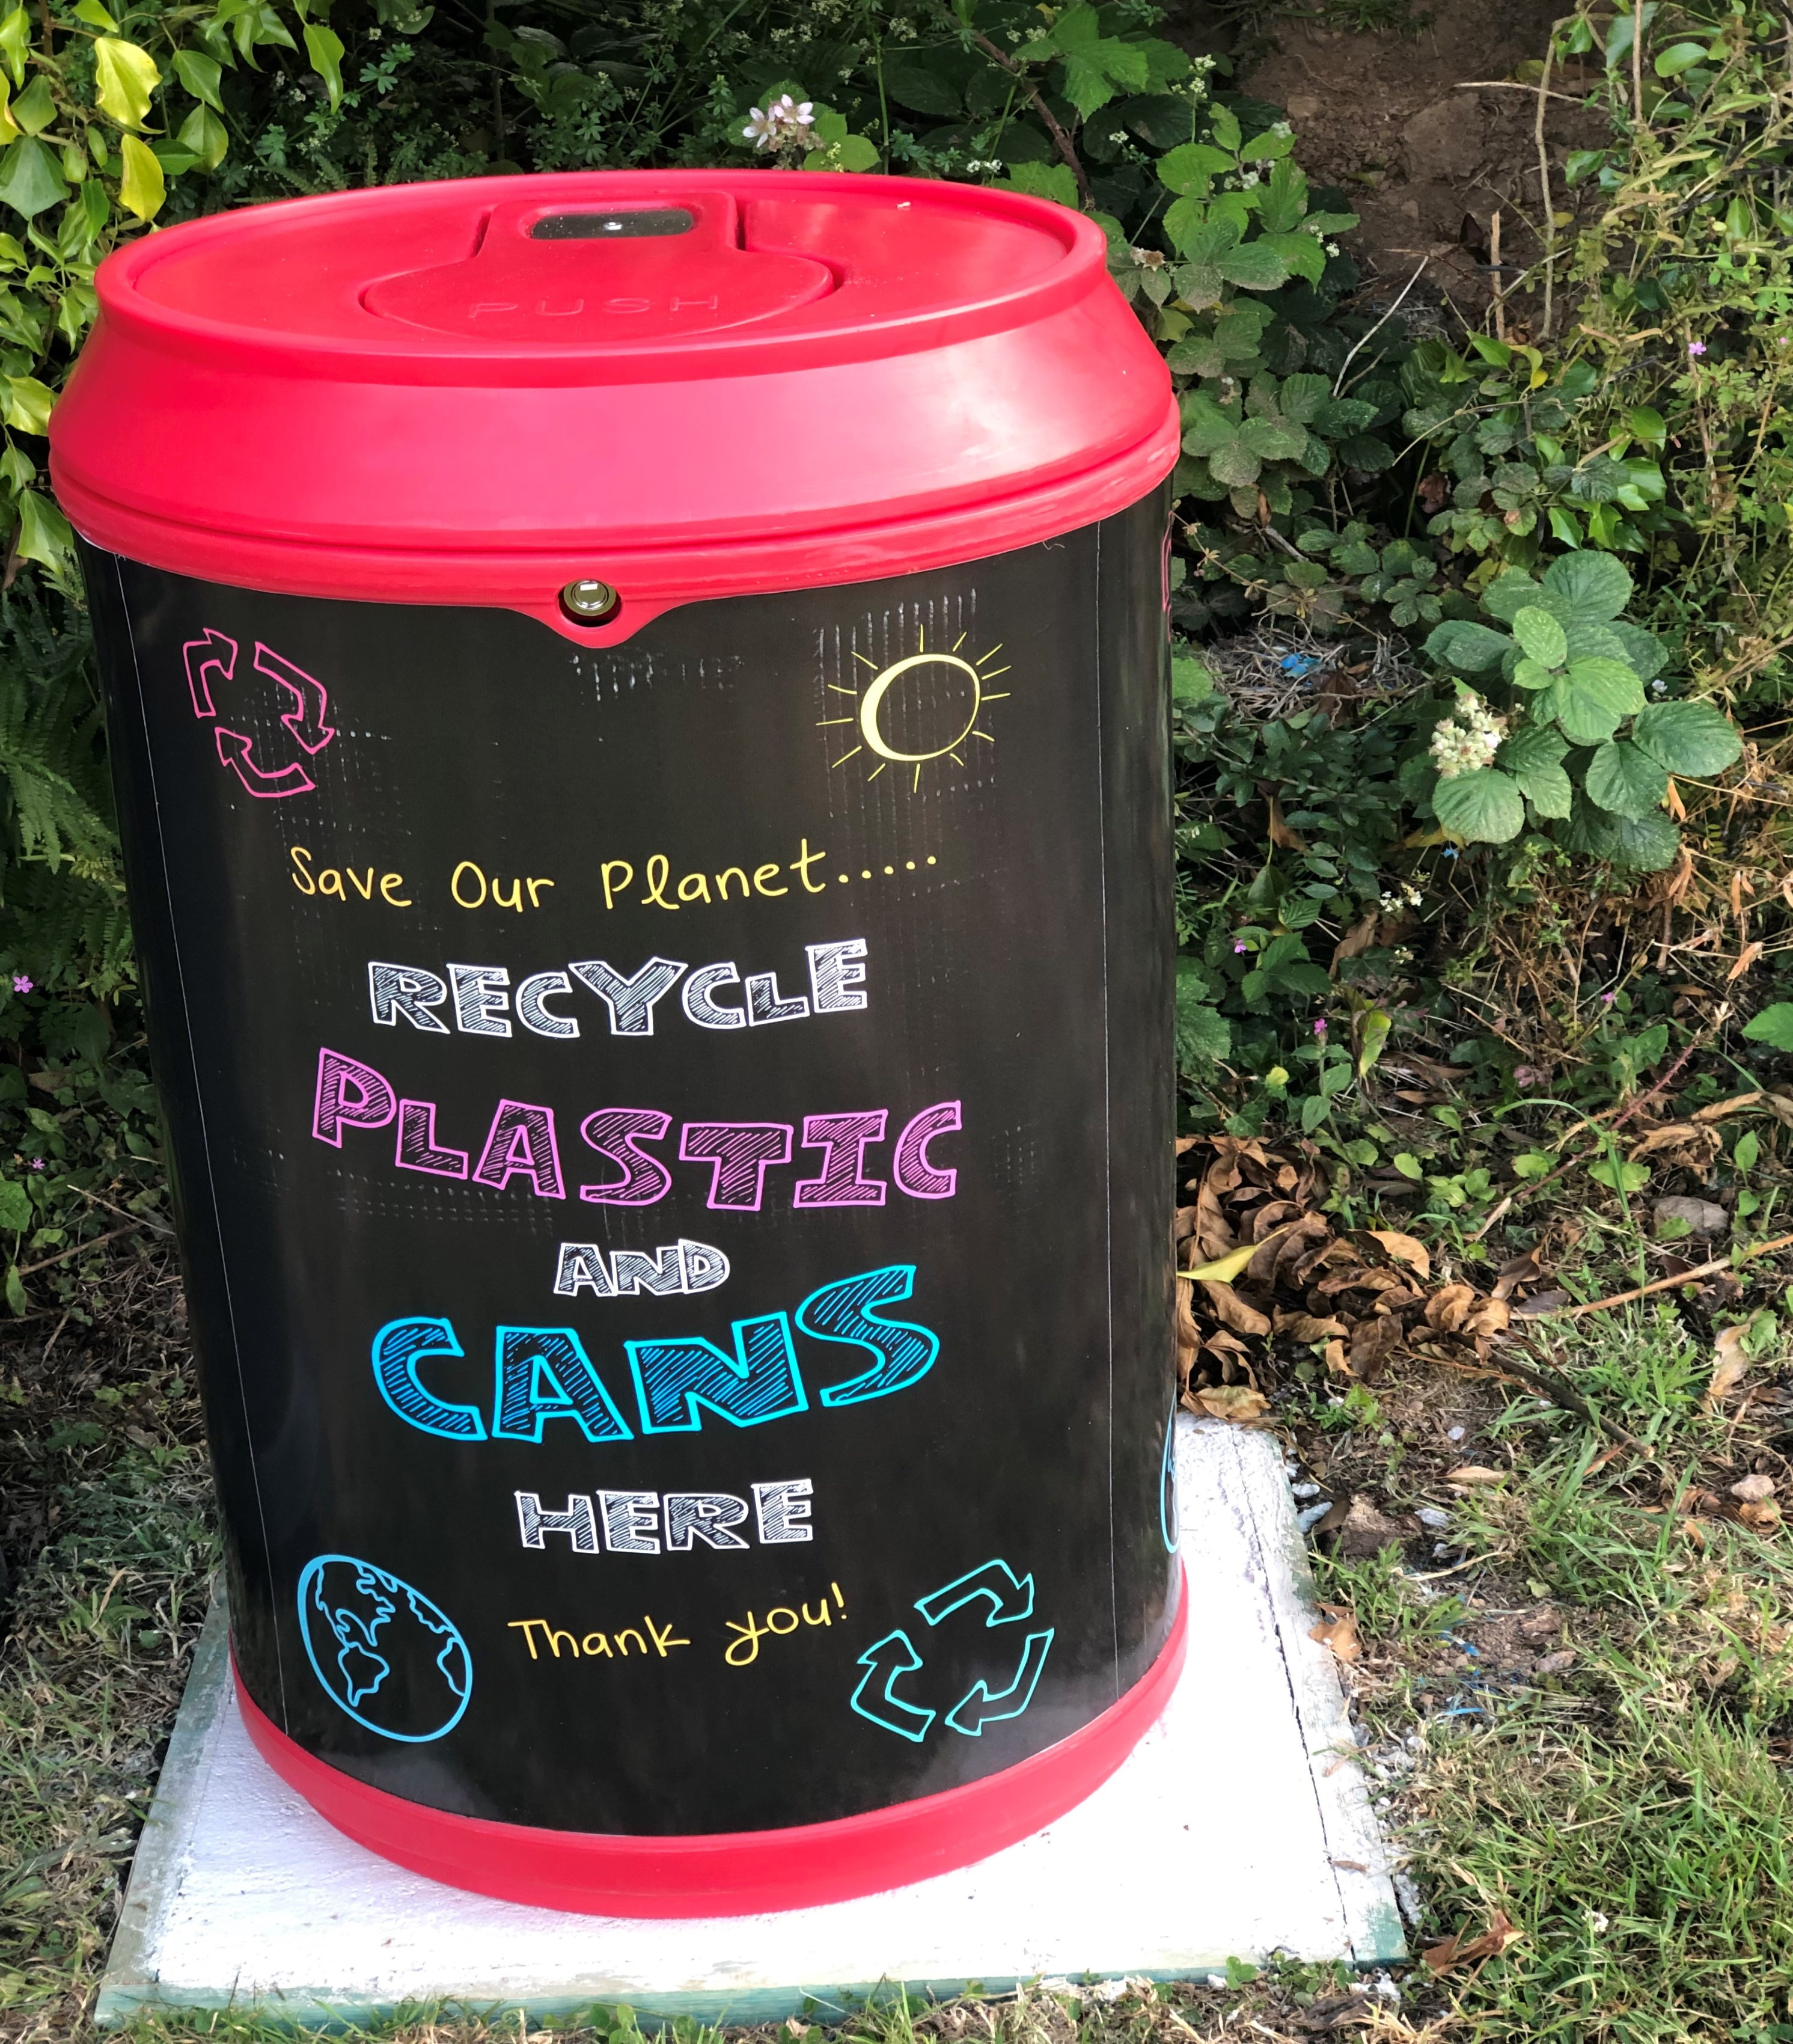 New park bins for Trewoon, Polgooth and Sticker!